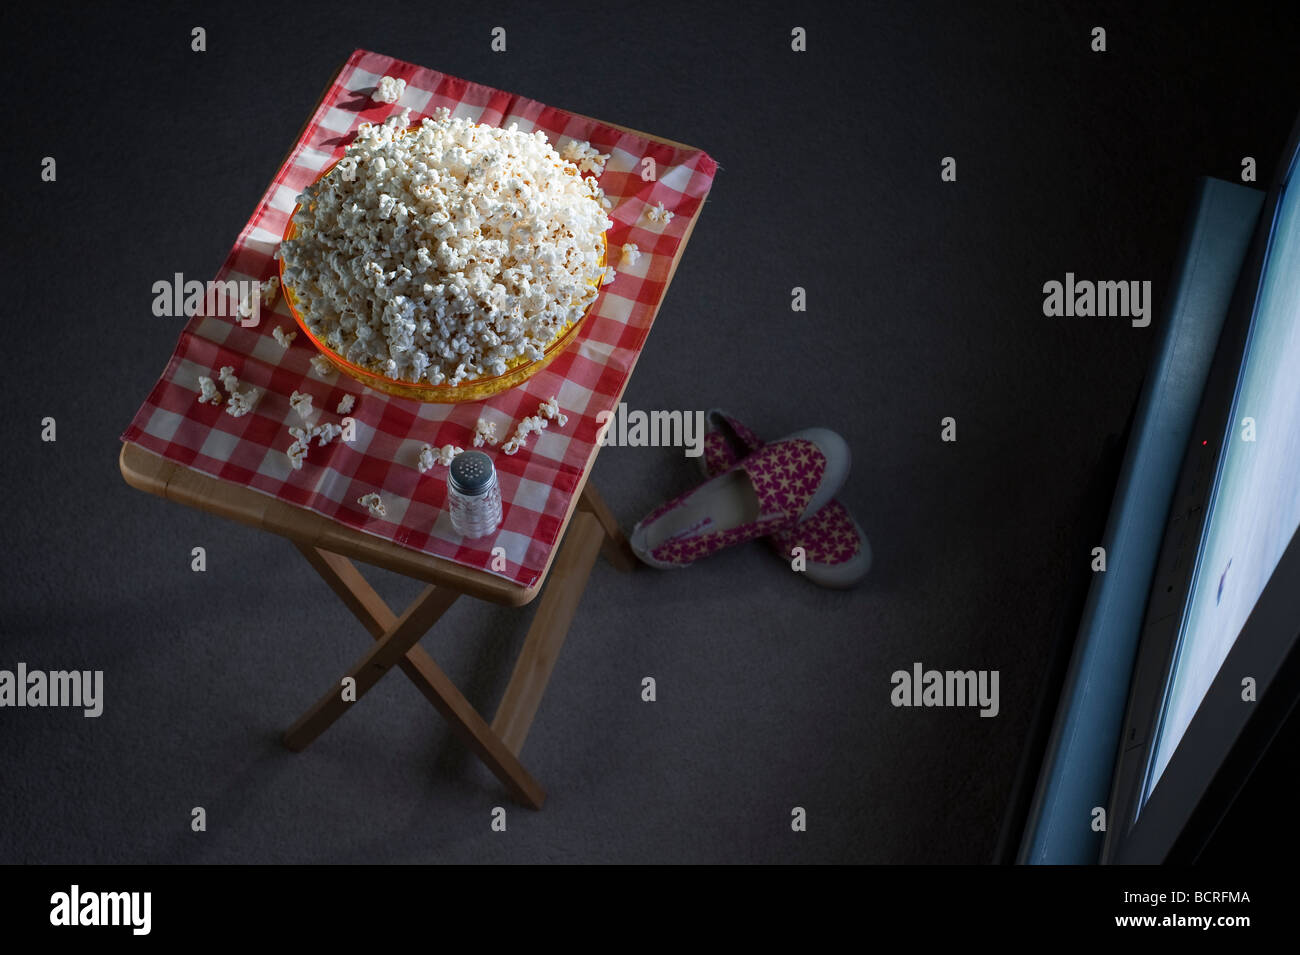 Living room of a house with popcorn on a tv tray in front of tv at night with bowl of popcorn Stock Photo